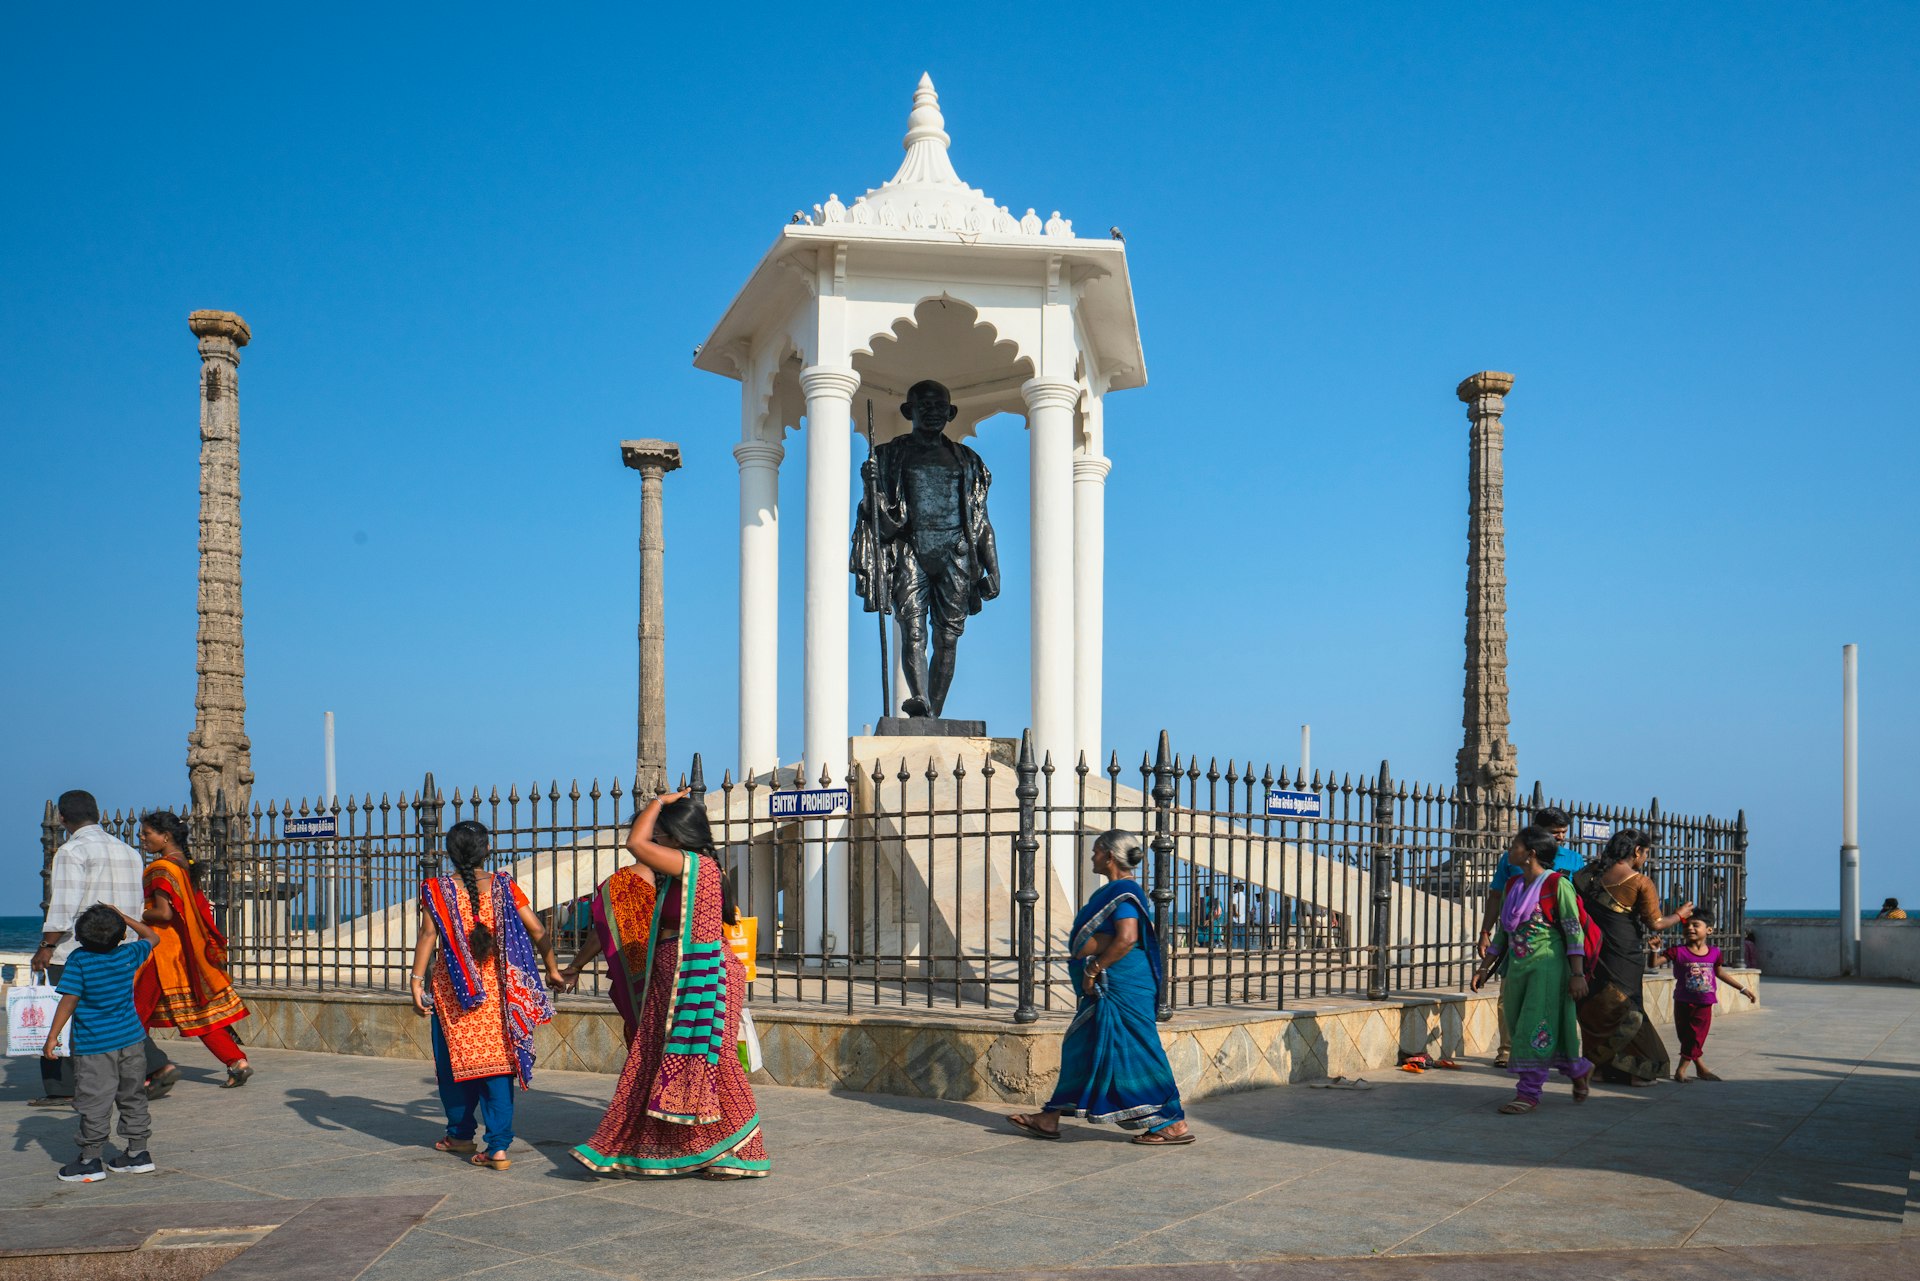 People walk by the Gandhi Memorial on at the promenade beach front, Pondicherry, India